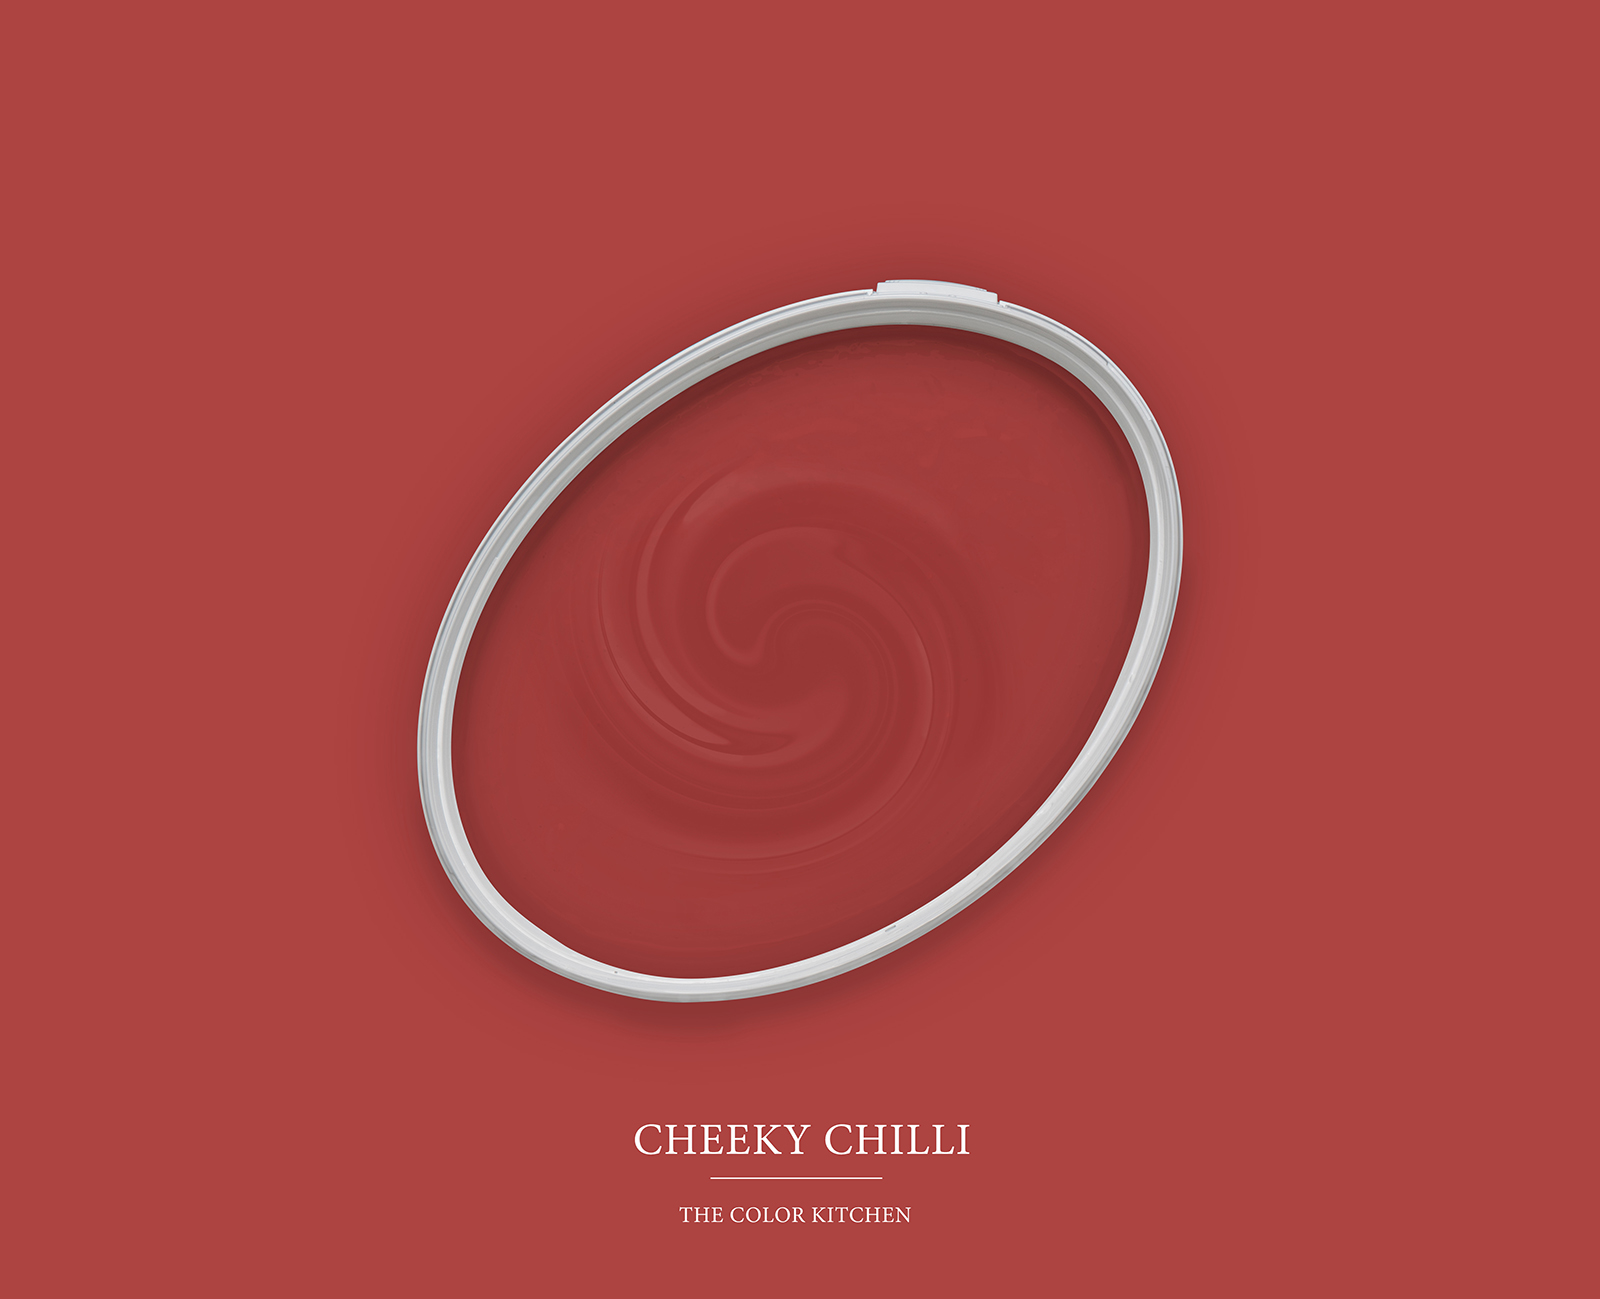         Wall Paint TCK7005 »Cheeky Chilli« in strong fire red – 2.5 litre
    